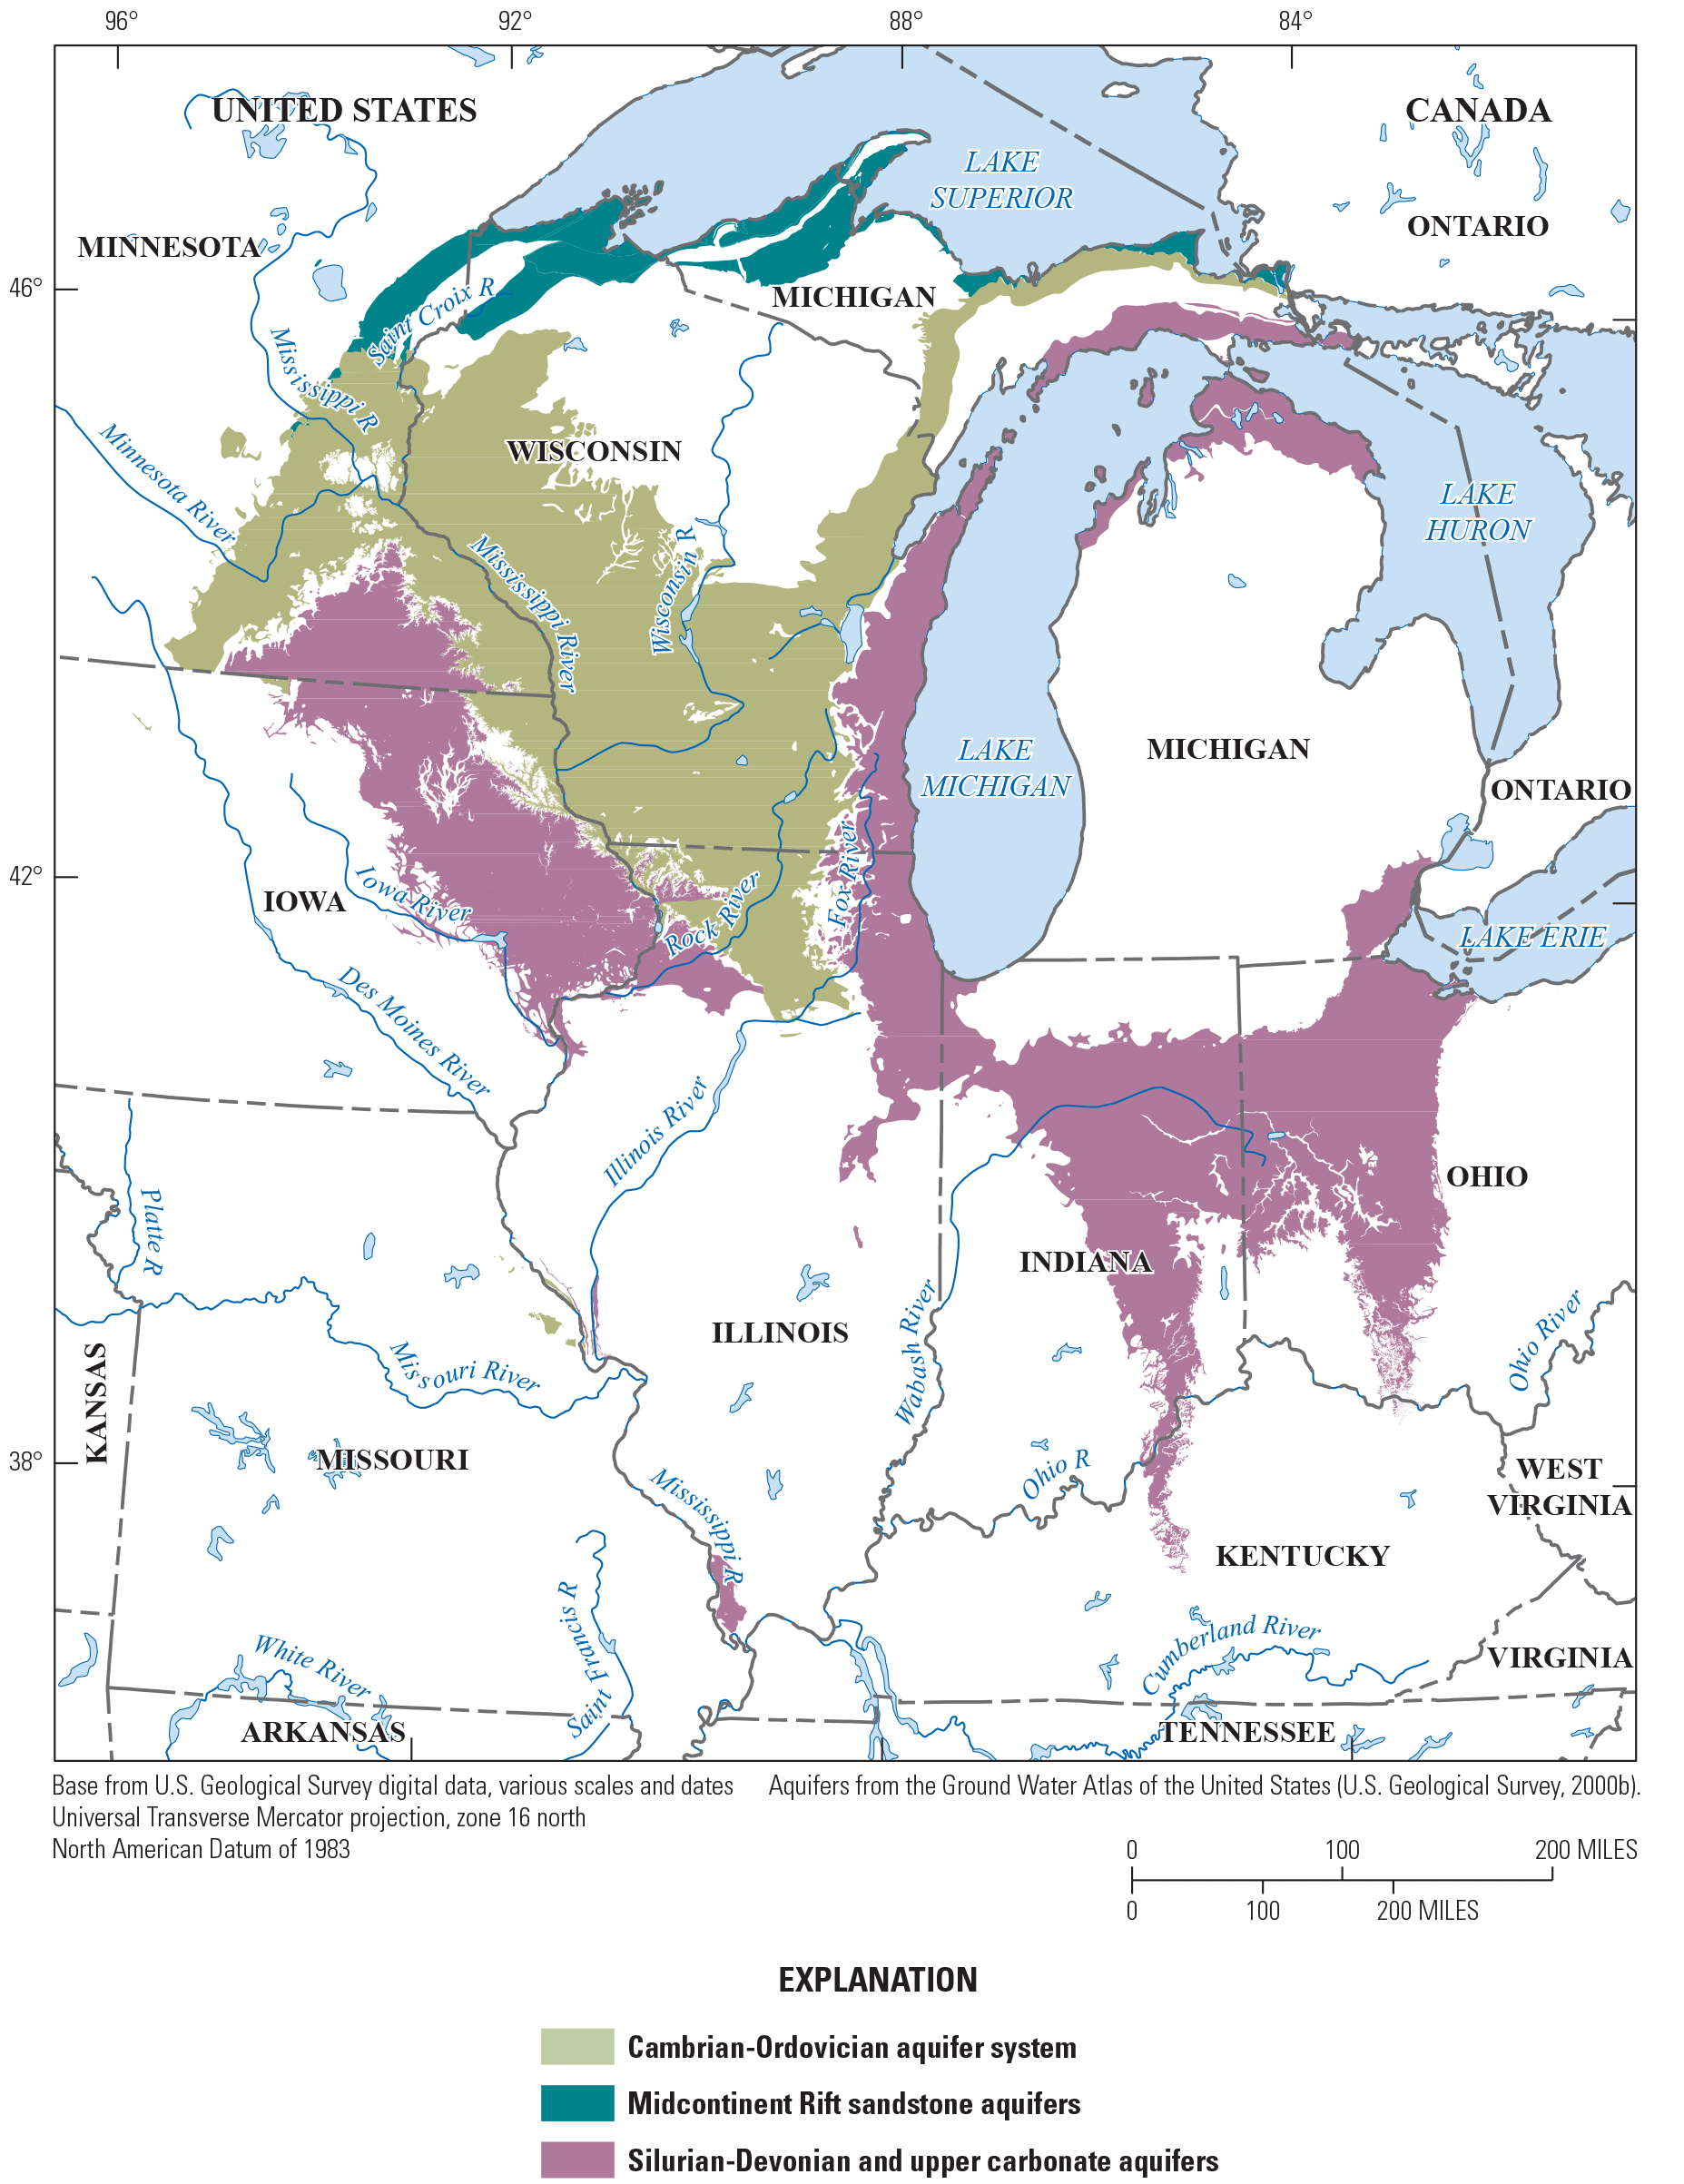 The new, more detailed extents of the Cambrian-Ordovician aquifer system, the Midcontinent
                        Rift sandstone aquifers, and the Silurian-Devonian and upper carbonate aquifers in
                        Minnesota, Iowa, Wisconsin, Michigan, Illinois, Indian, Ohio, and Kentucky.